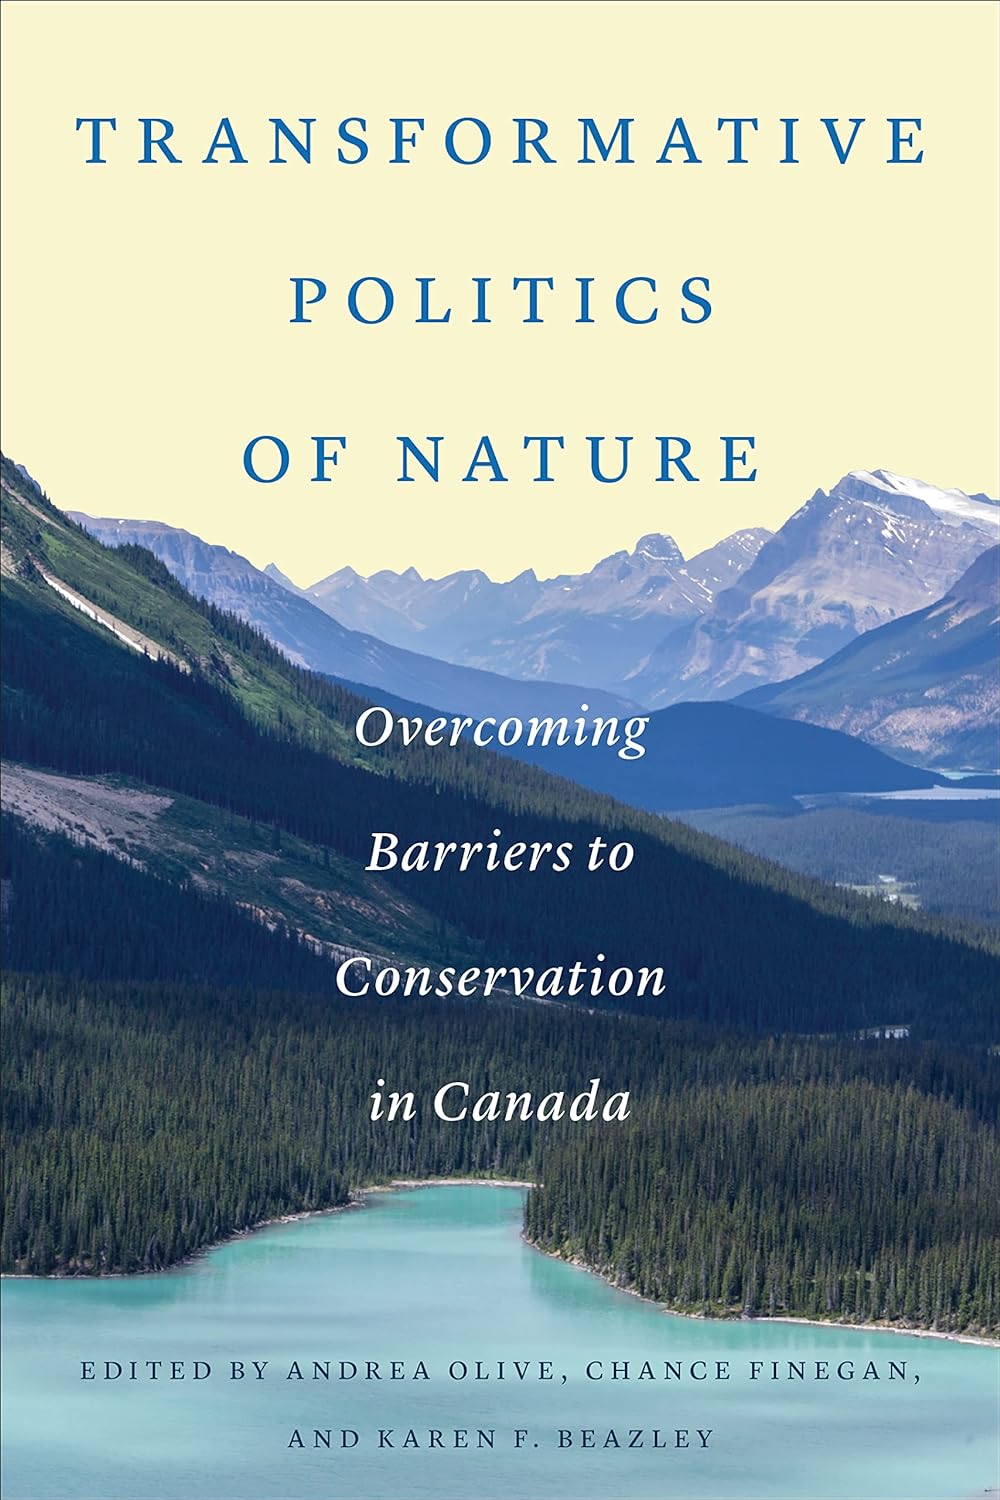 Image Transformative politics of nature : overcoming barriers to conservation in Canada